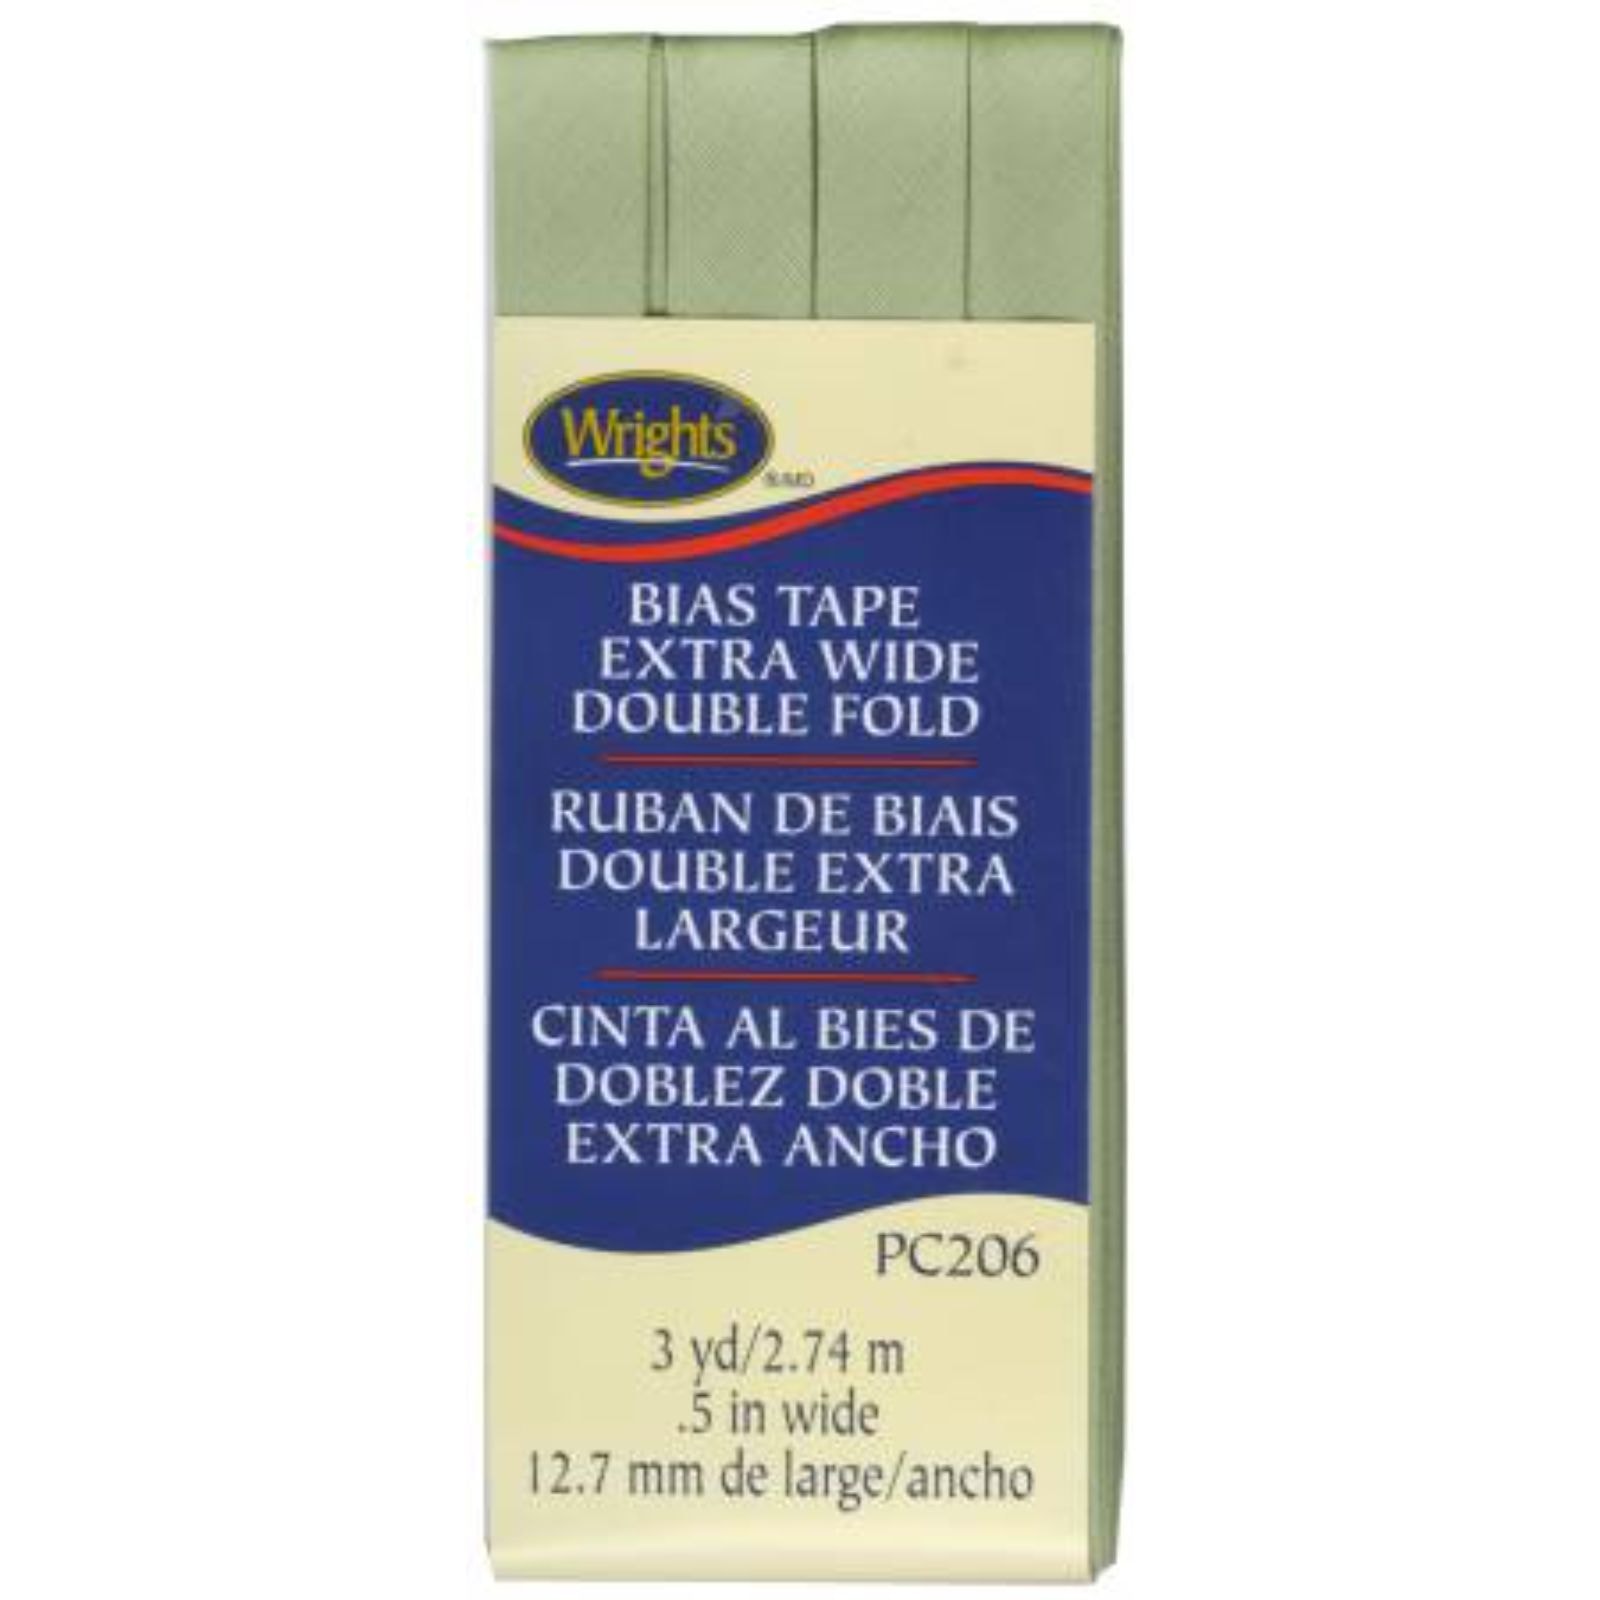 Wrights Extra Wide Double Fold Bias Tape - Seagreen